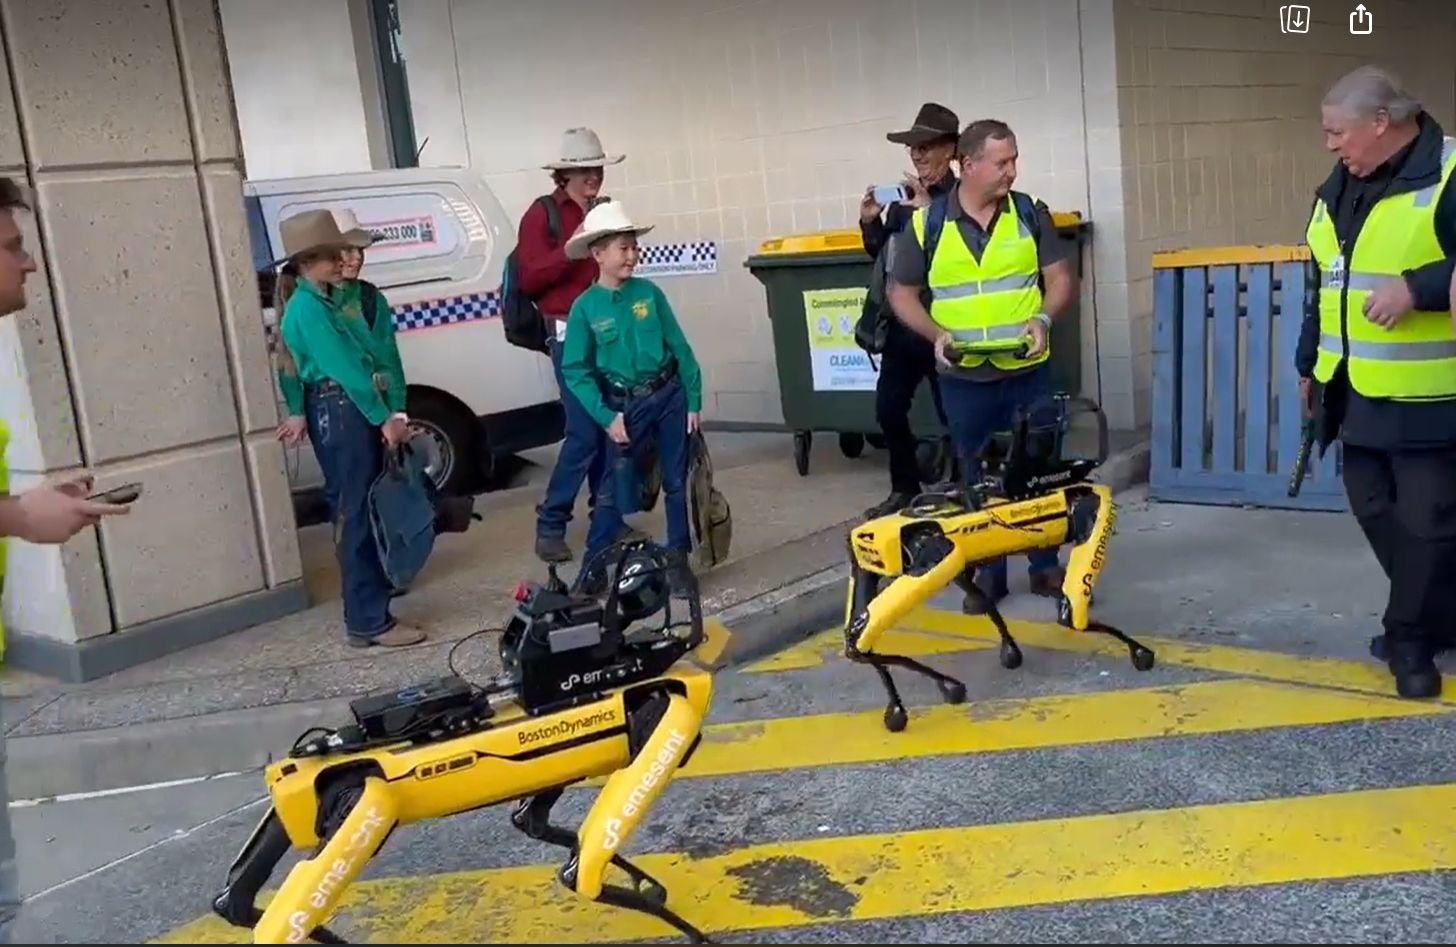 Robot dogs get leeway from security at the back gate